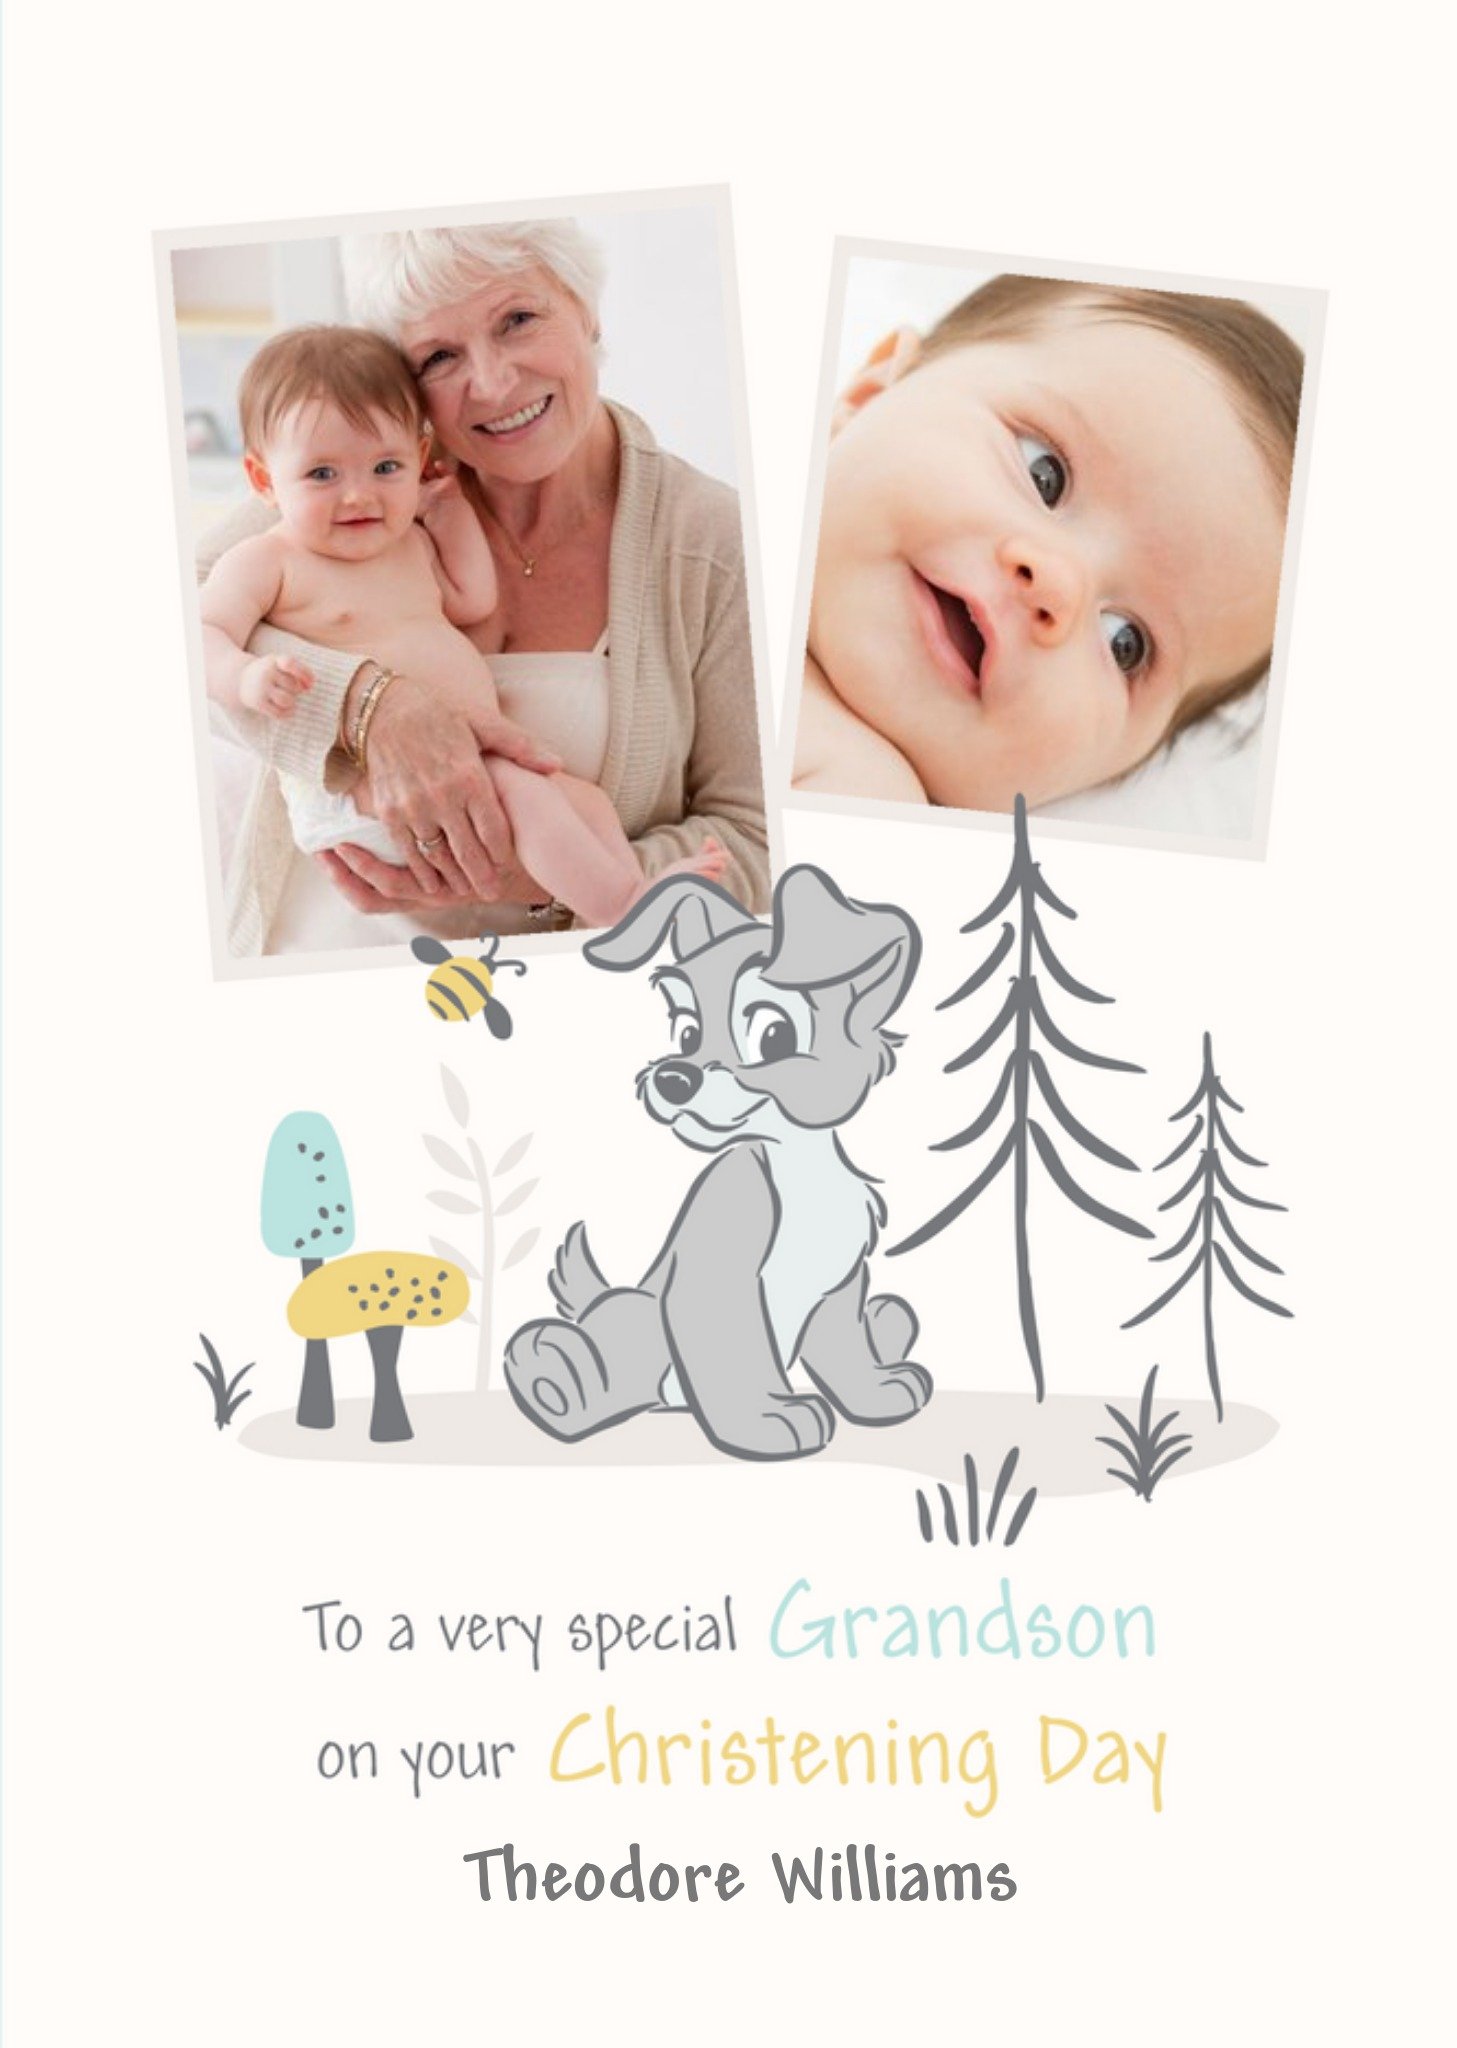 Disney Lady And The Tramp Special Grandson Photo Upload Christening Card Ecard